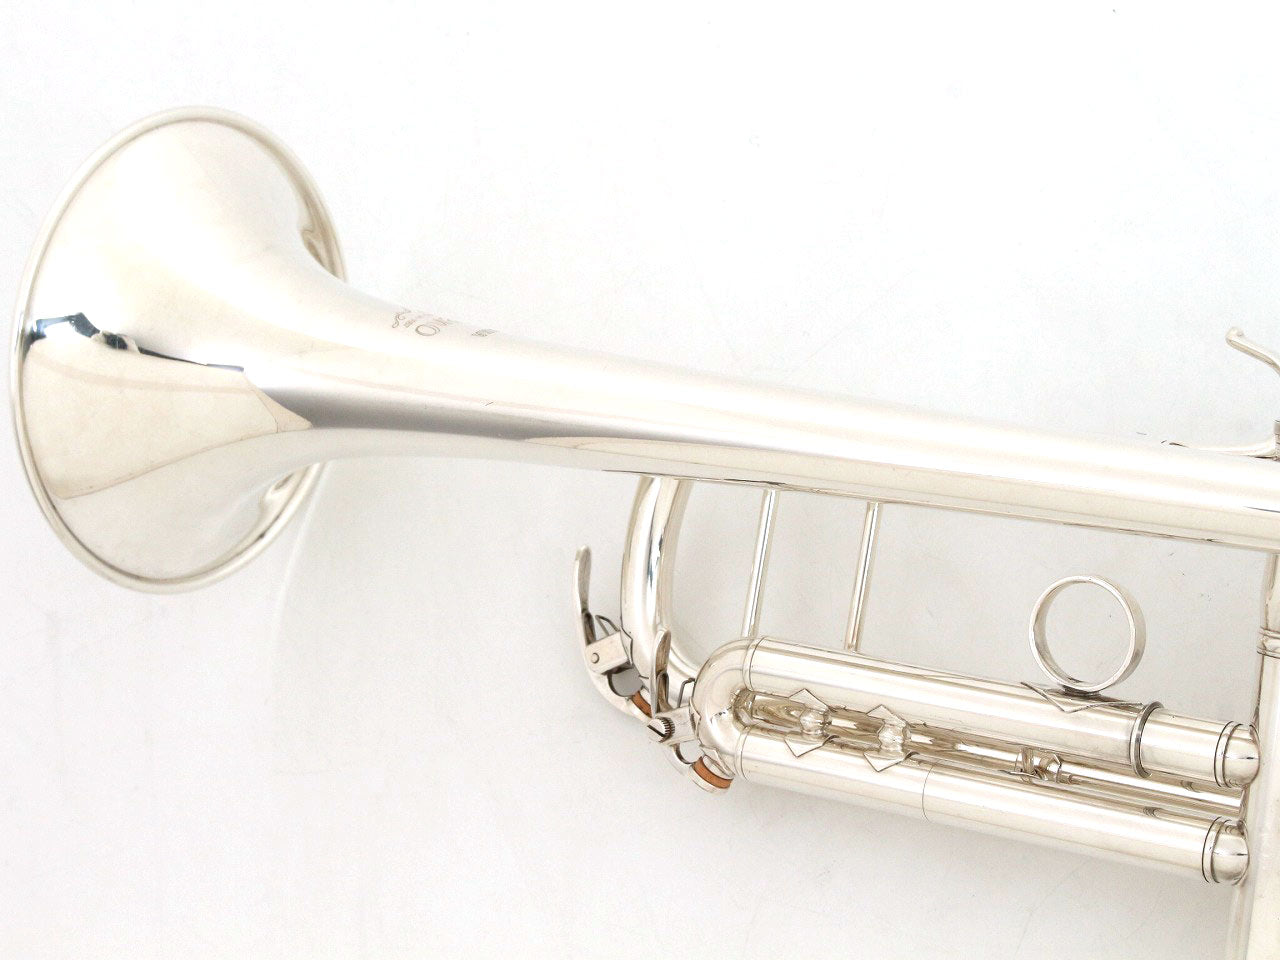 [SN 460736] USED YAMAHA / Trumpet YTR-8335GS Gold brass, silver plated finish [11]